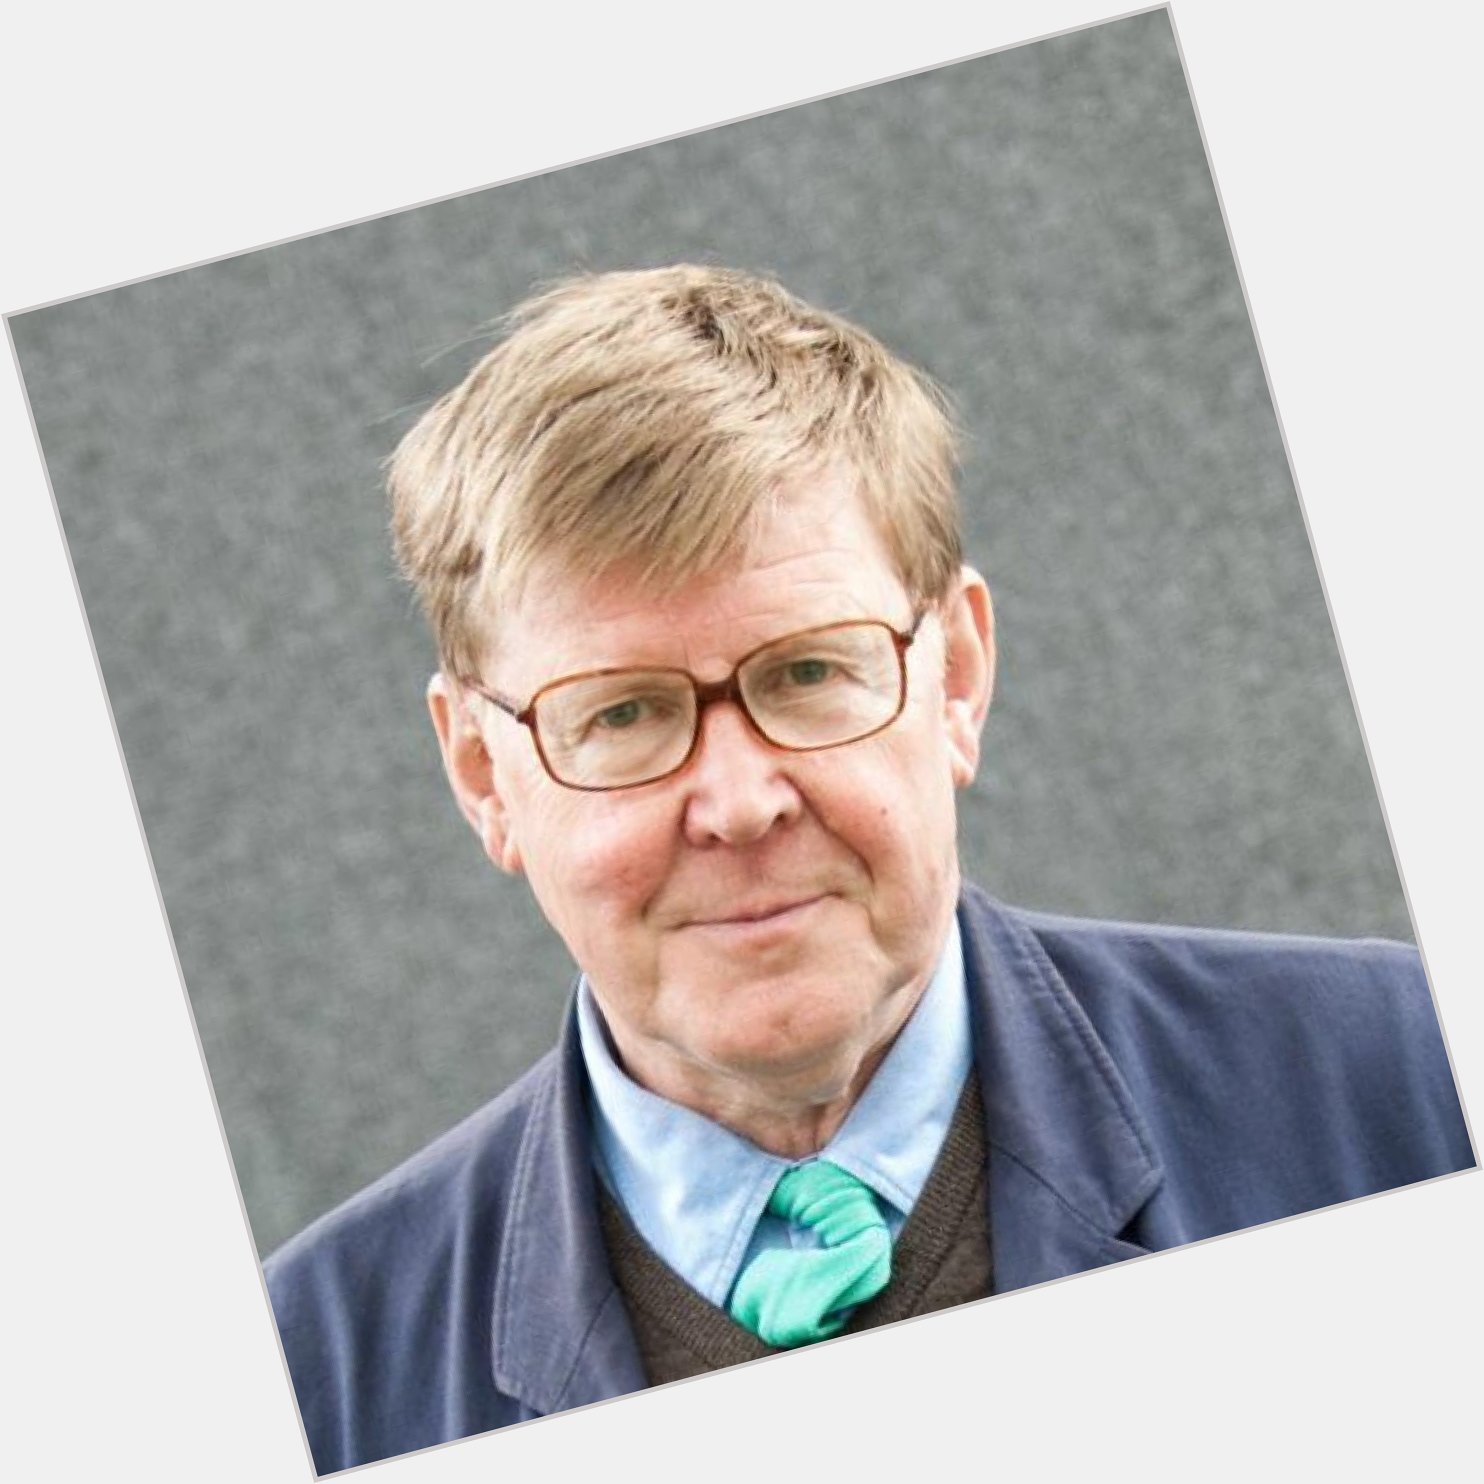 Happy Birthday to my favourite bloke to do an impression of - Alan Bennett   